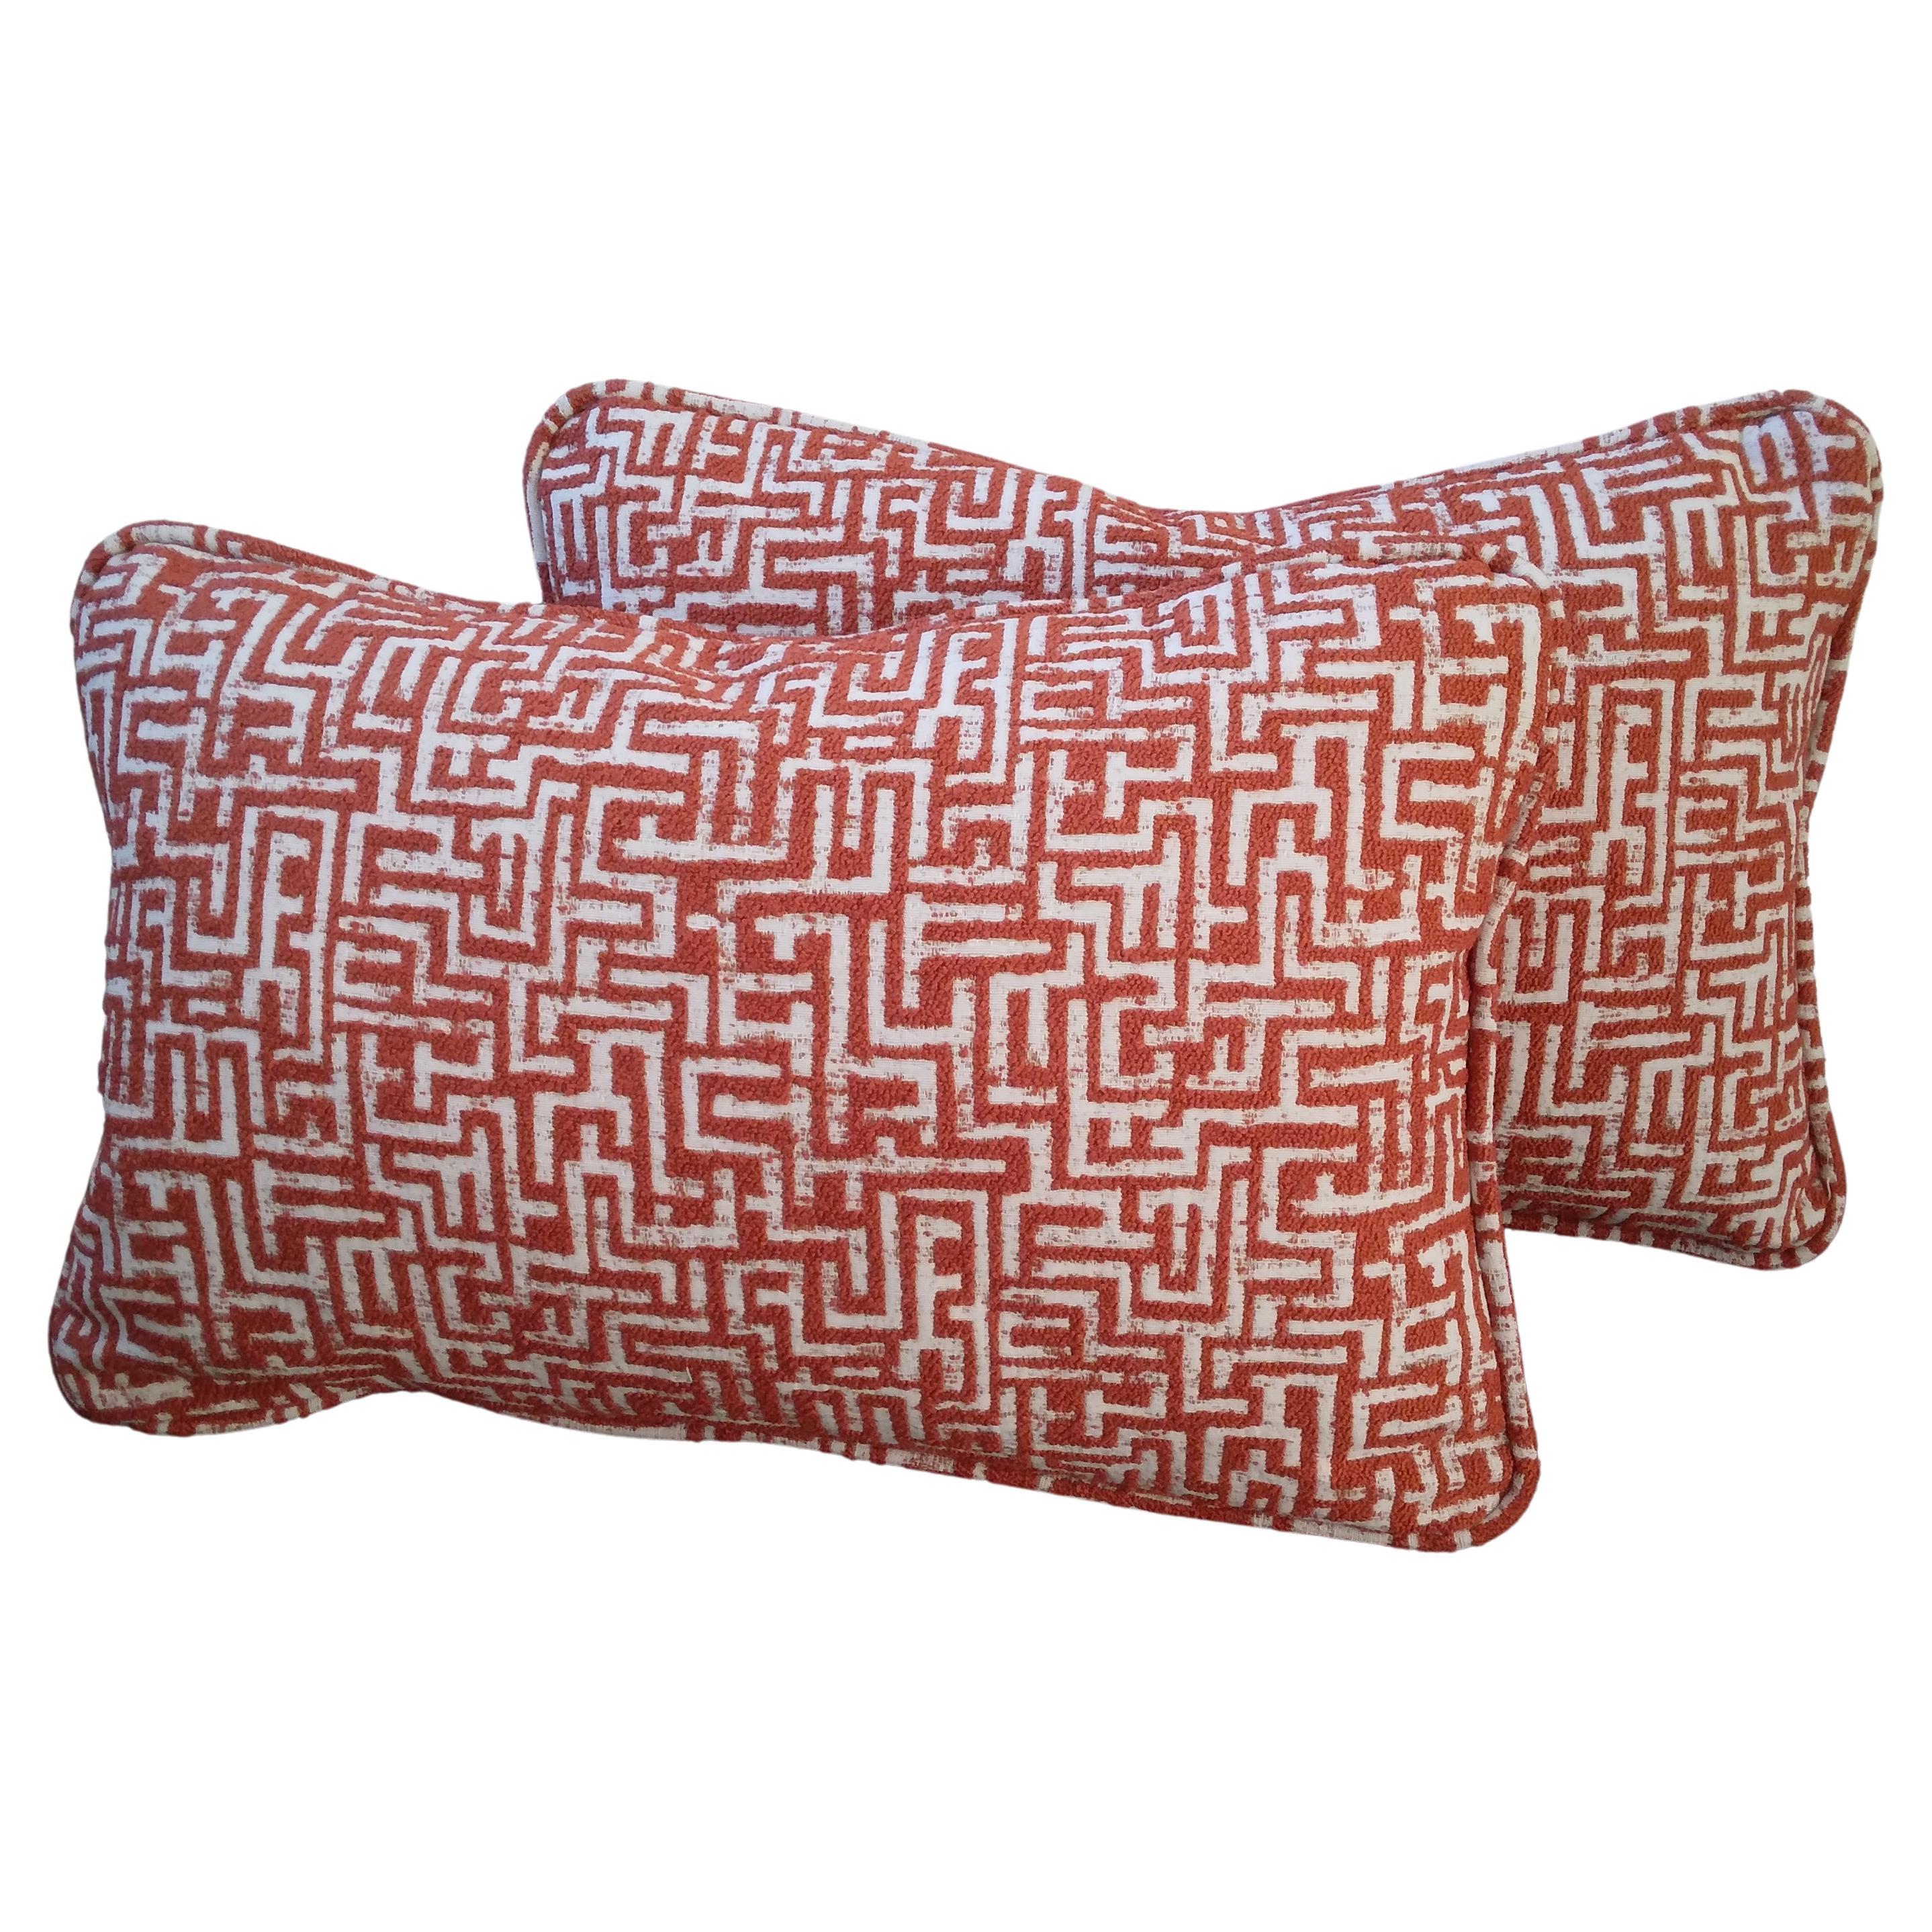 Kuba-inspired Geometric Jacquard Accent Pillows in Orange and White - a pair  For Sale